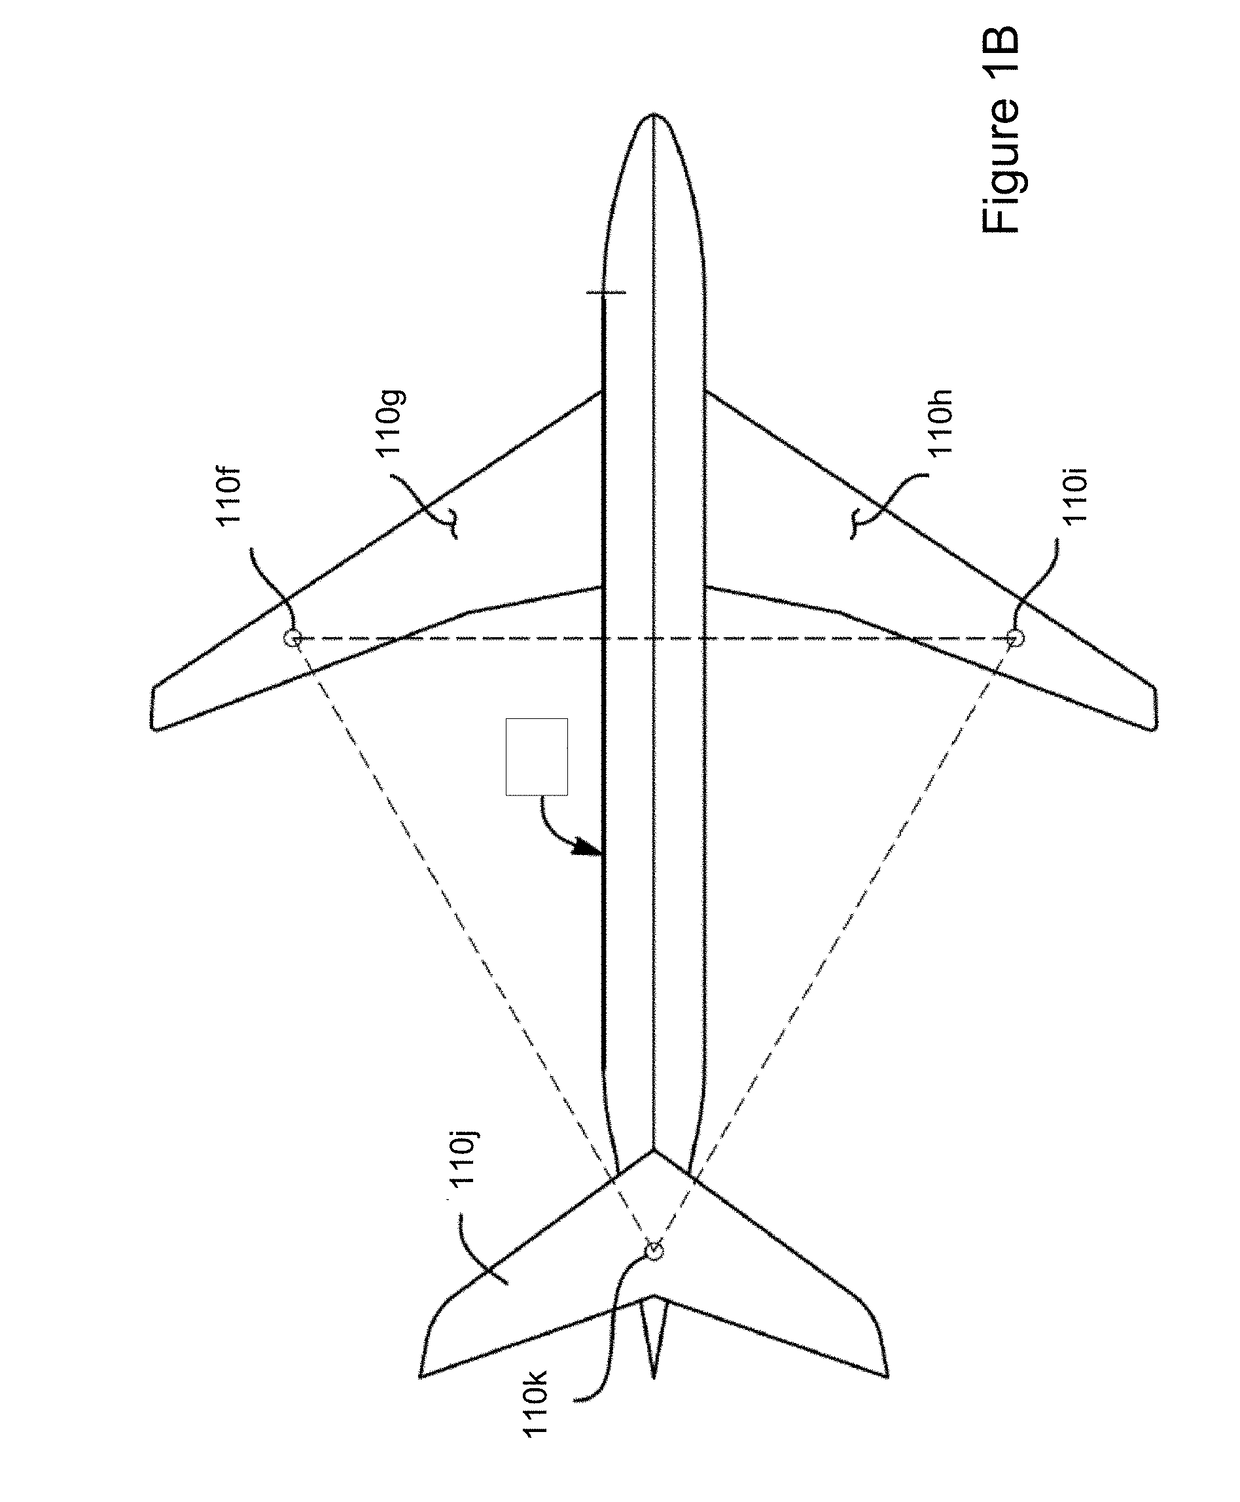 System and Method for Onboard Wake and Clear Air Turbulence Avoidance